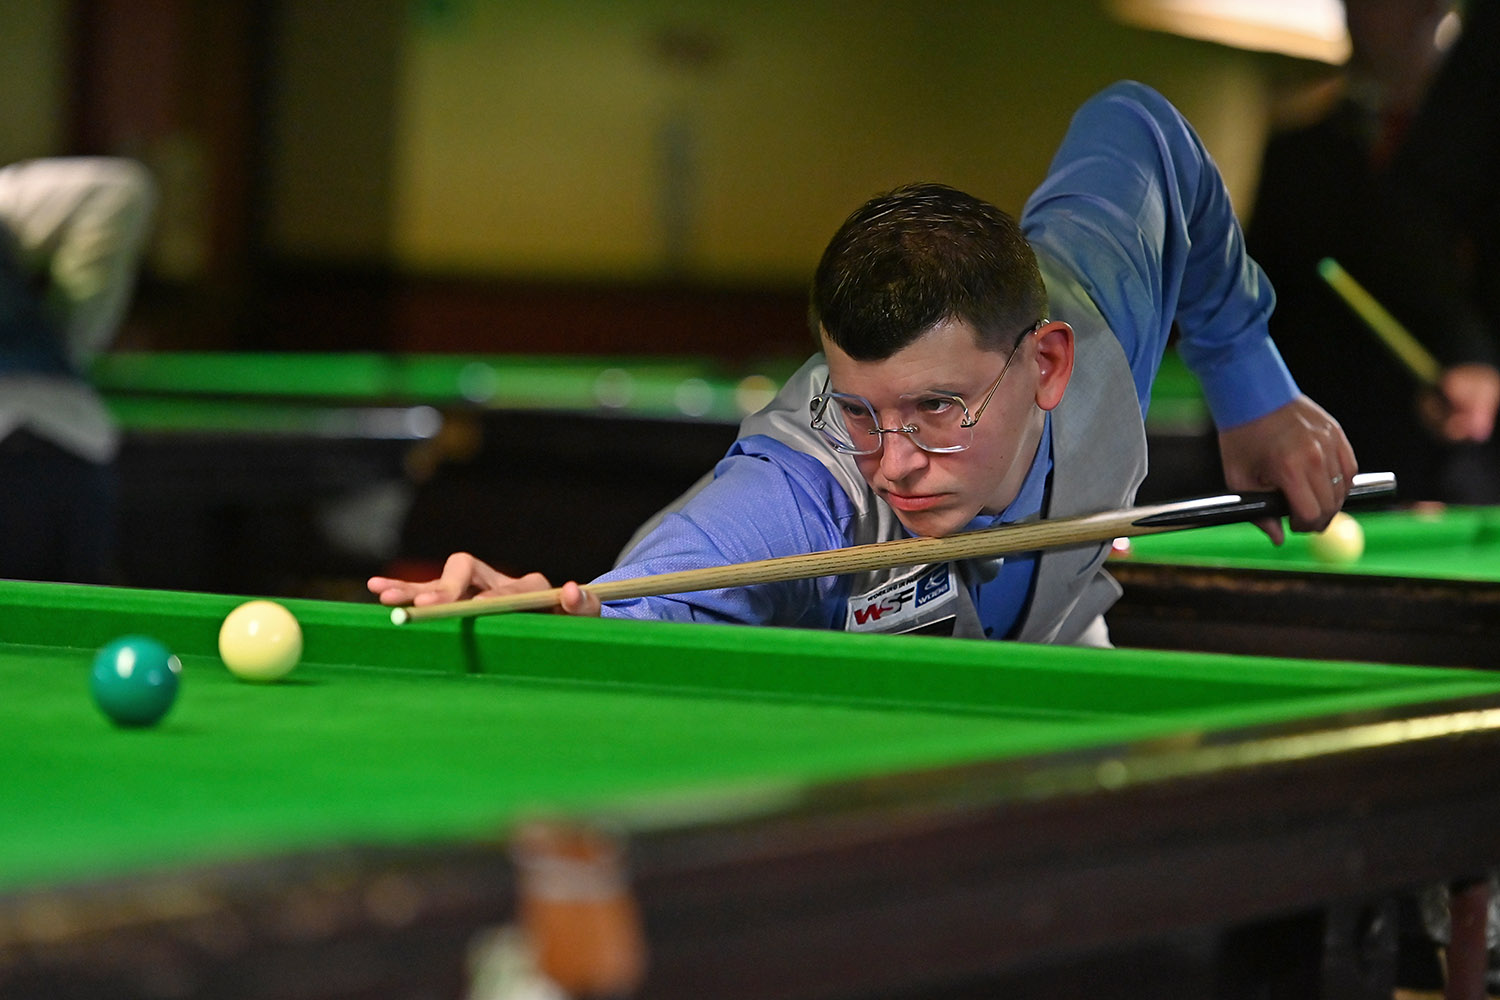 UK Disability Snooker Championship 2022 Enter Now!